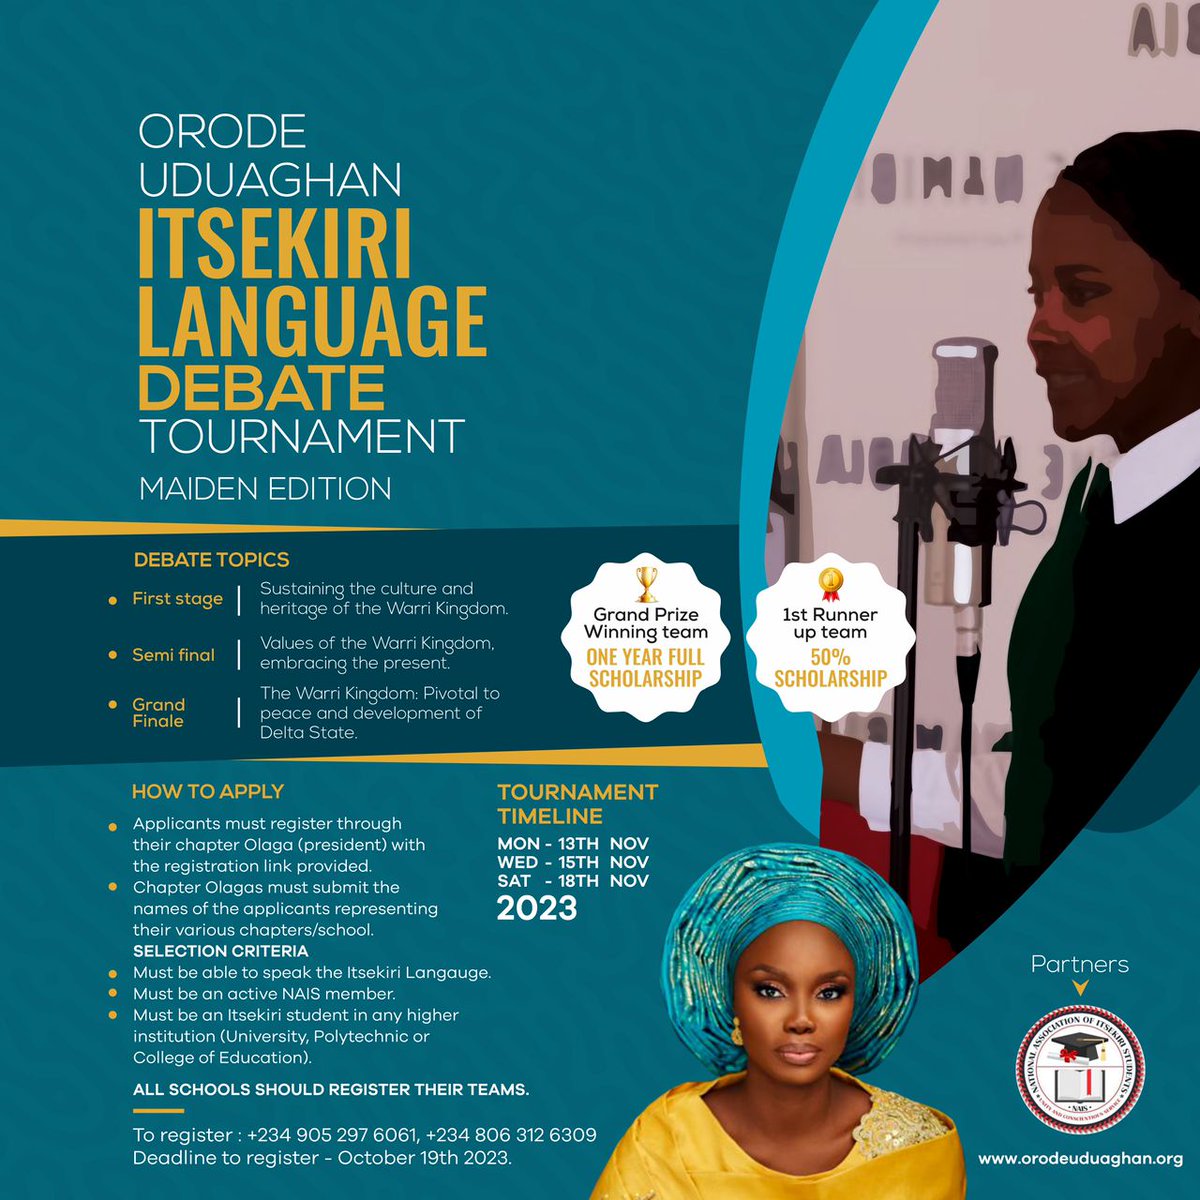 @OrodeUduaghan Itsekiri Language Debate for Itsekiri Students. Grand Prize for Winning Team: One Year Full Scholarship. You must be able to Speak Itsekiri, must be a NAIS member and also be in any Higher Institution.